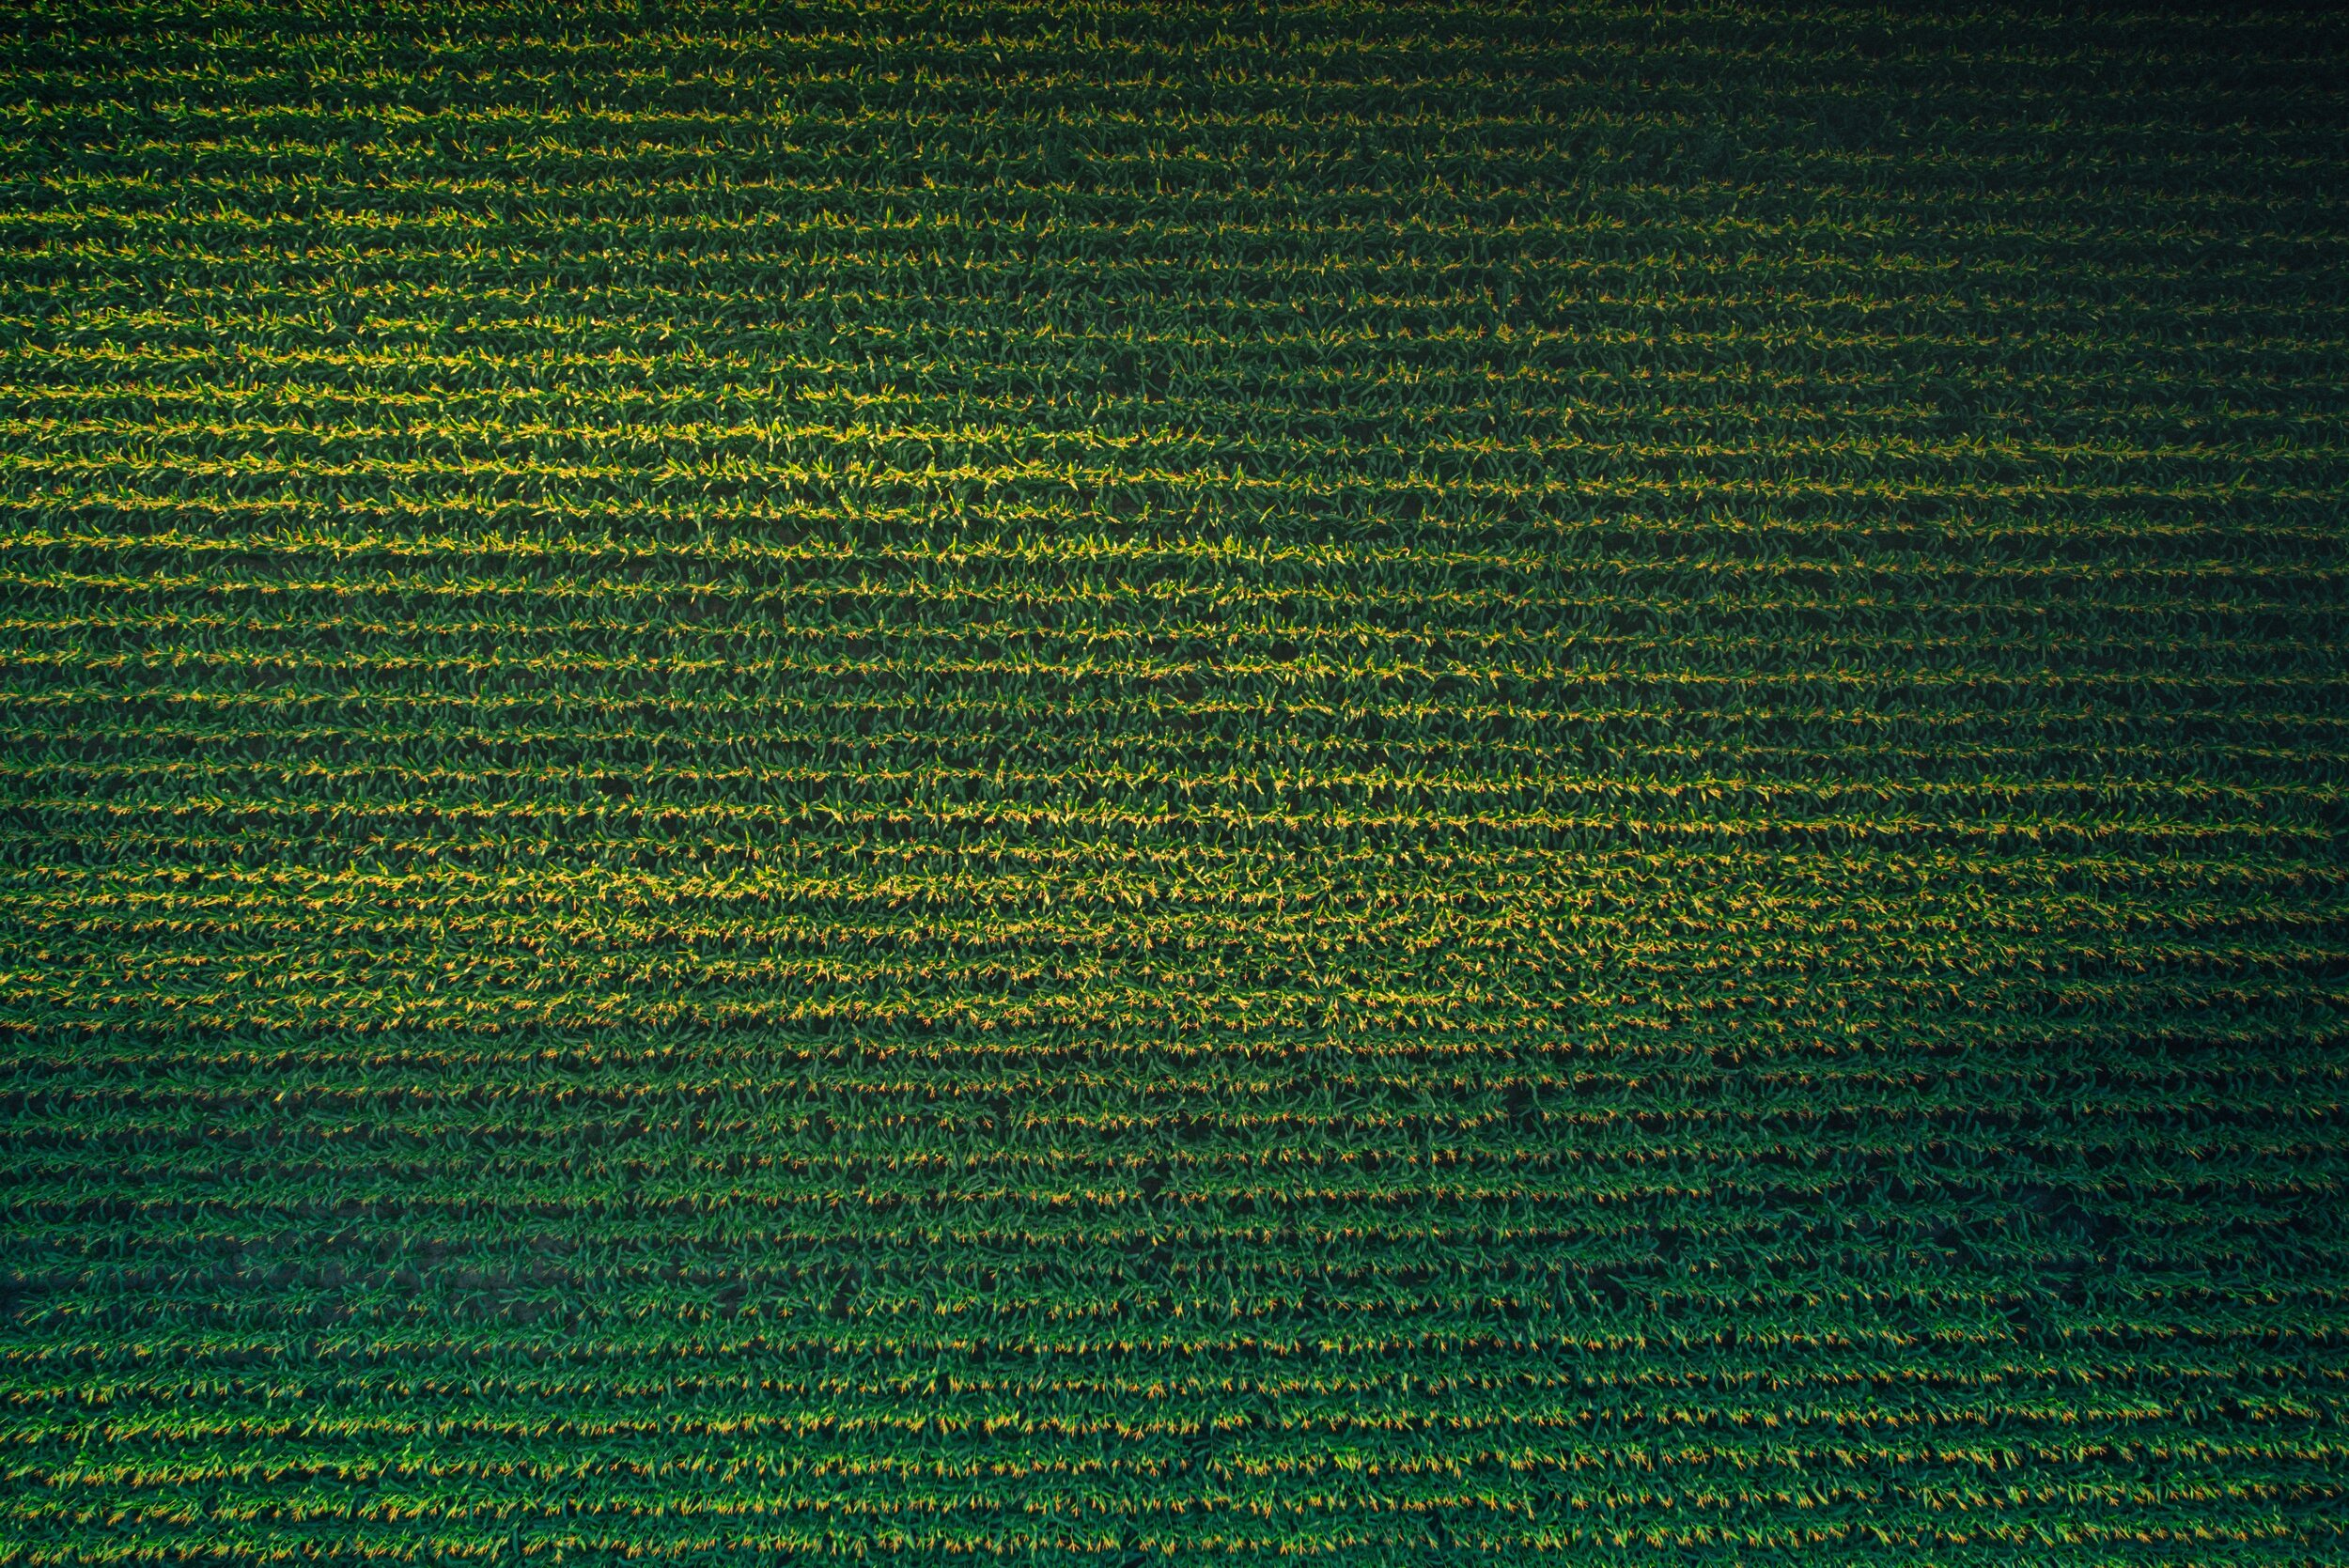 Image description: An aerial photo of green rows of corn with yellow tops